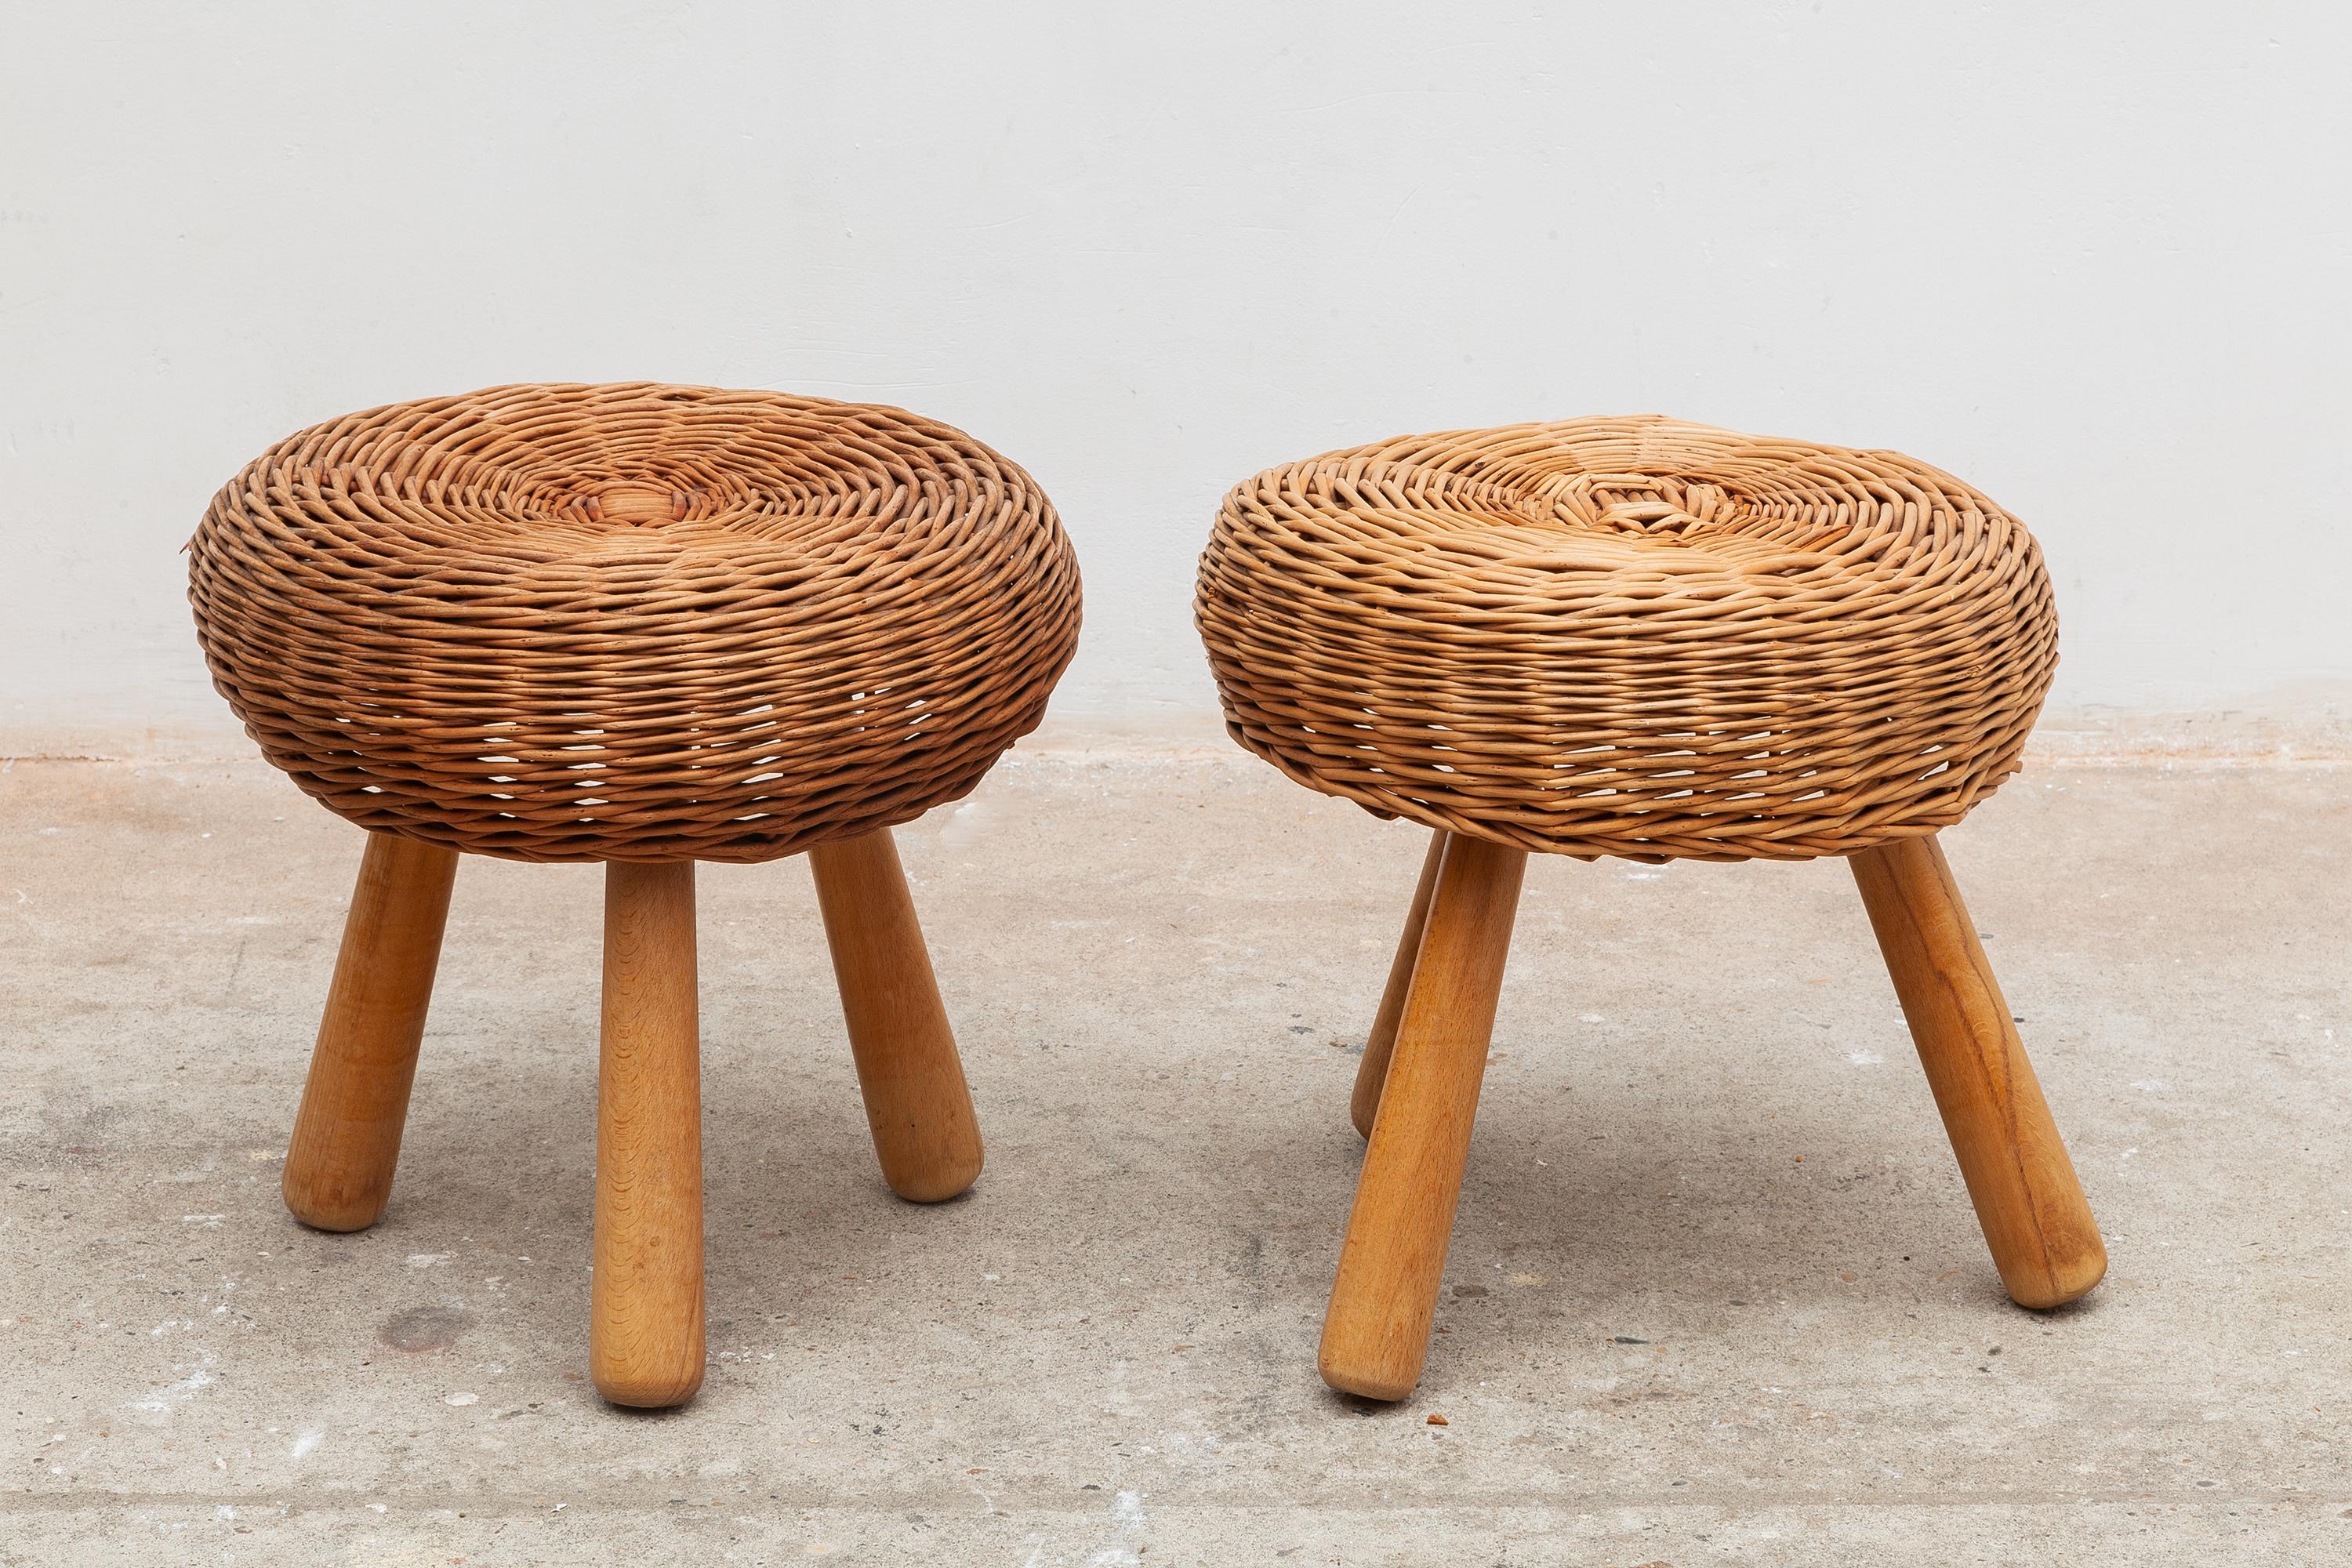 Vintage rattan stool set in the manner of Charlotte Perriand. One large and two small. Can be used as footstools, seating or tables. Tapered wooden legs. The legs can screw off.
Small: 33 W x 30 H cm Large: 47 W x 44 H cm.
  